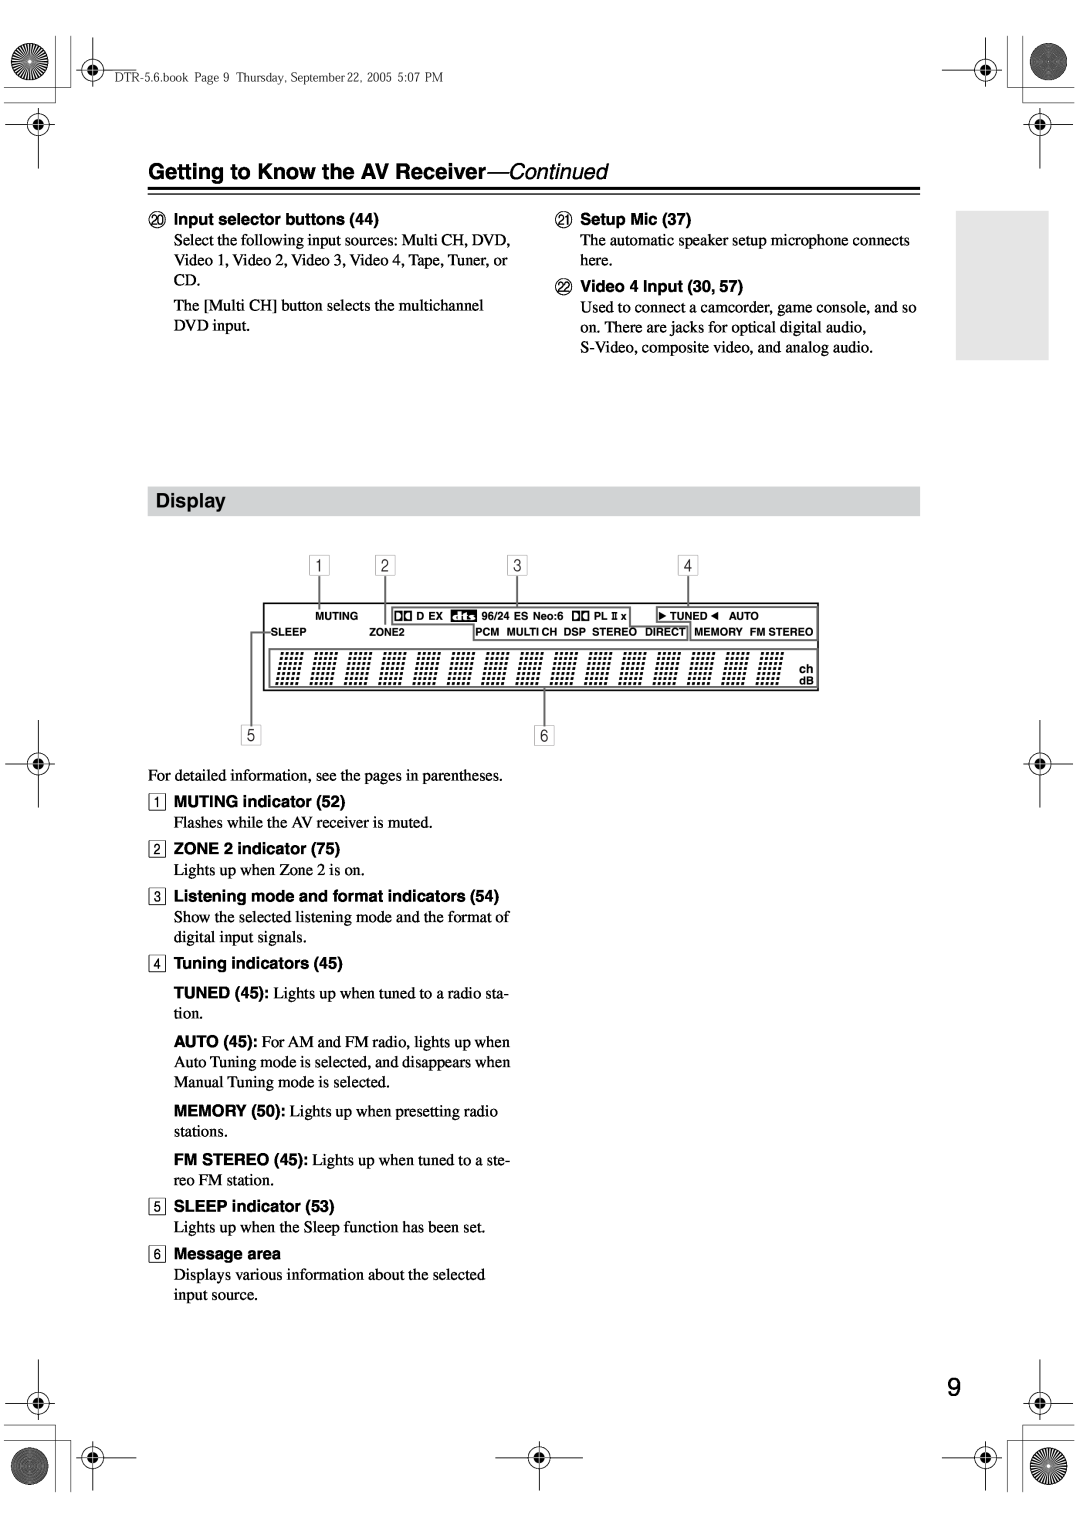 Integra DTR-5.6 instruction manual Getting to Know the AV Receiver—Continued, Display 